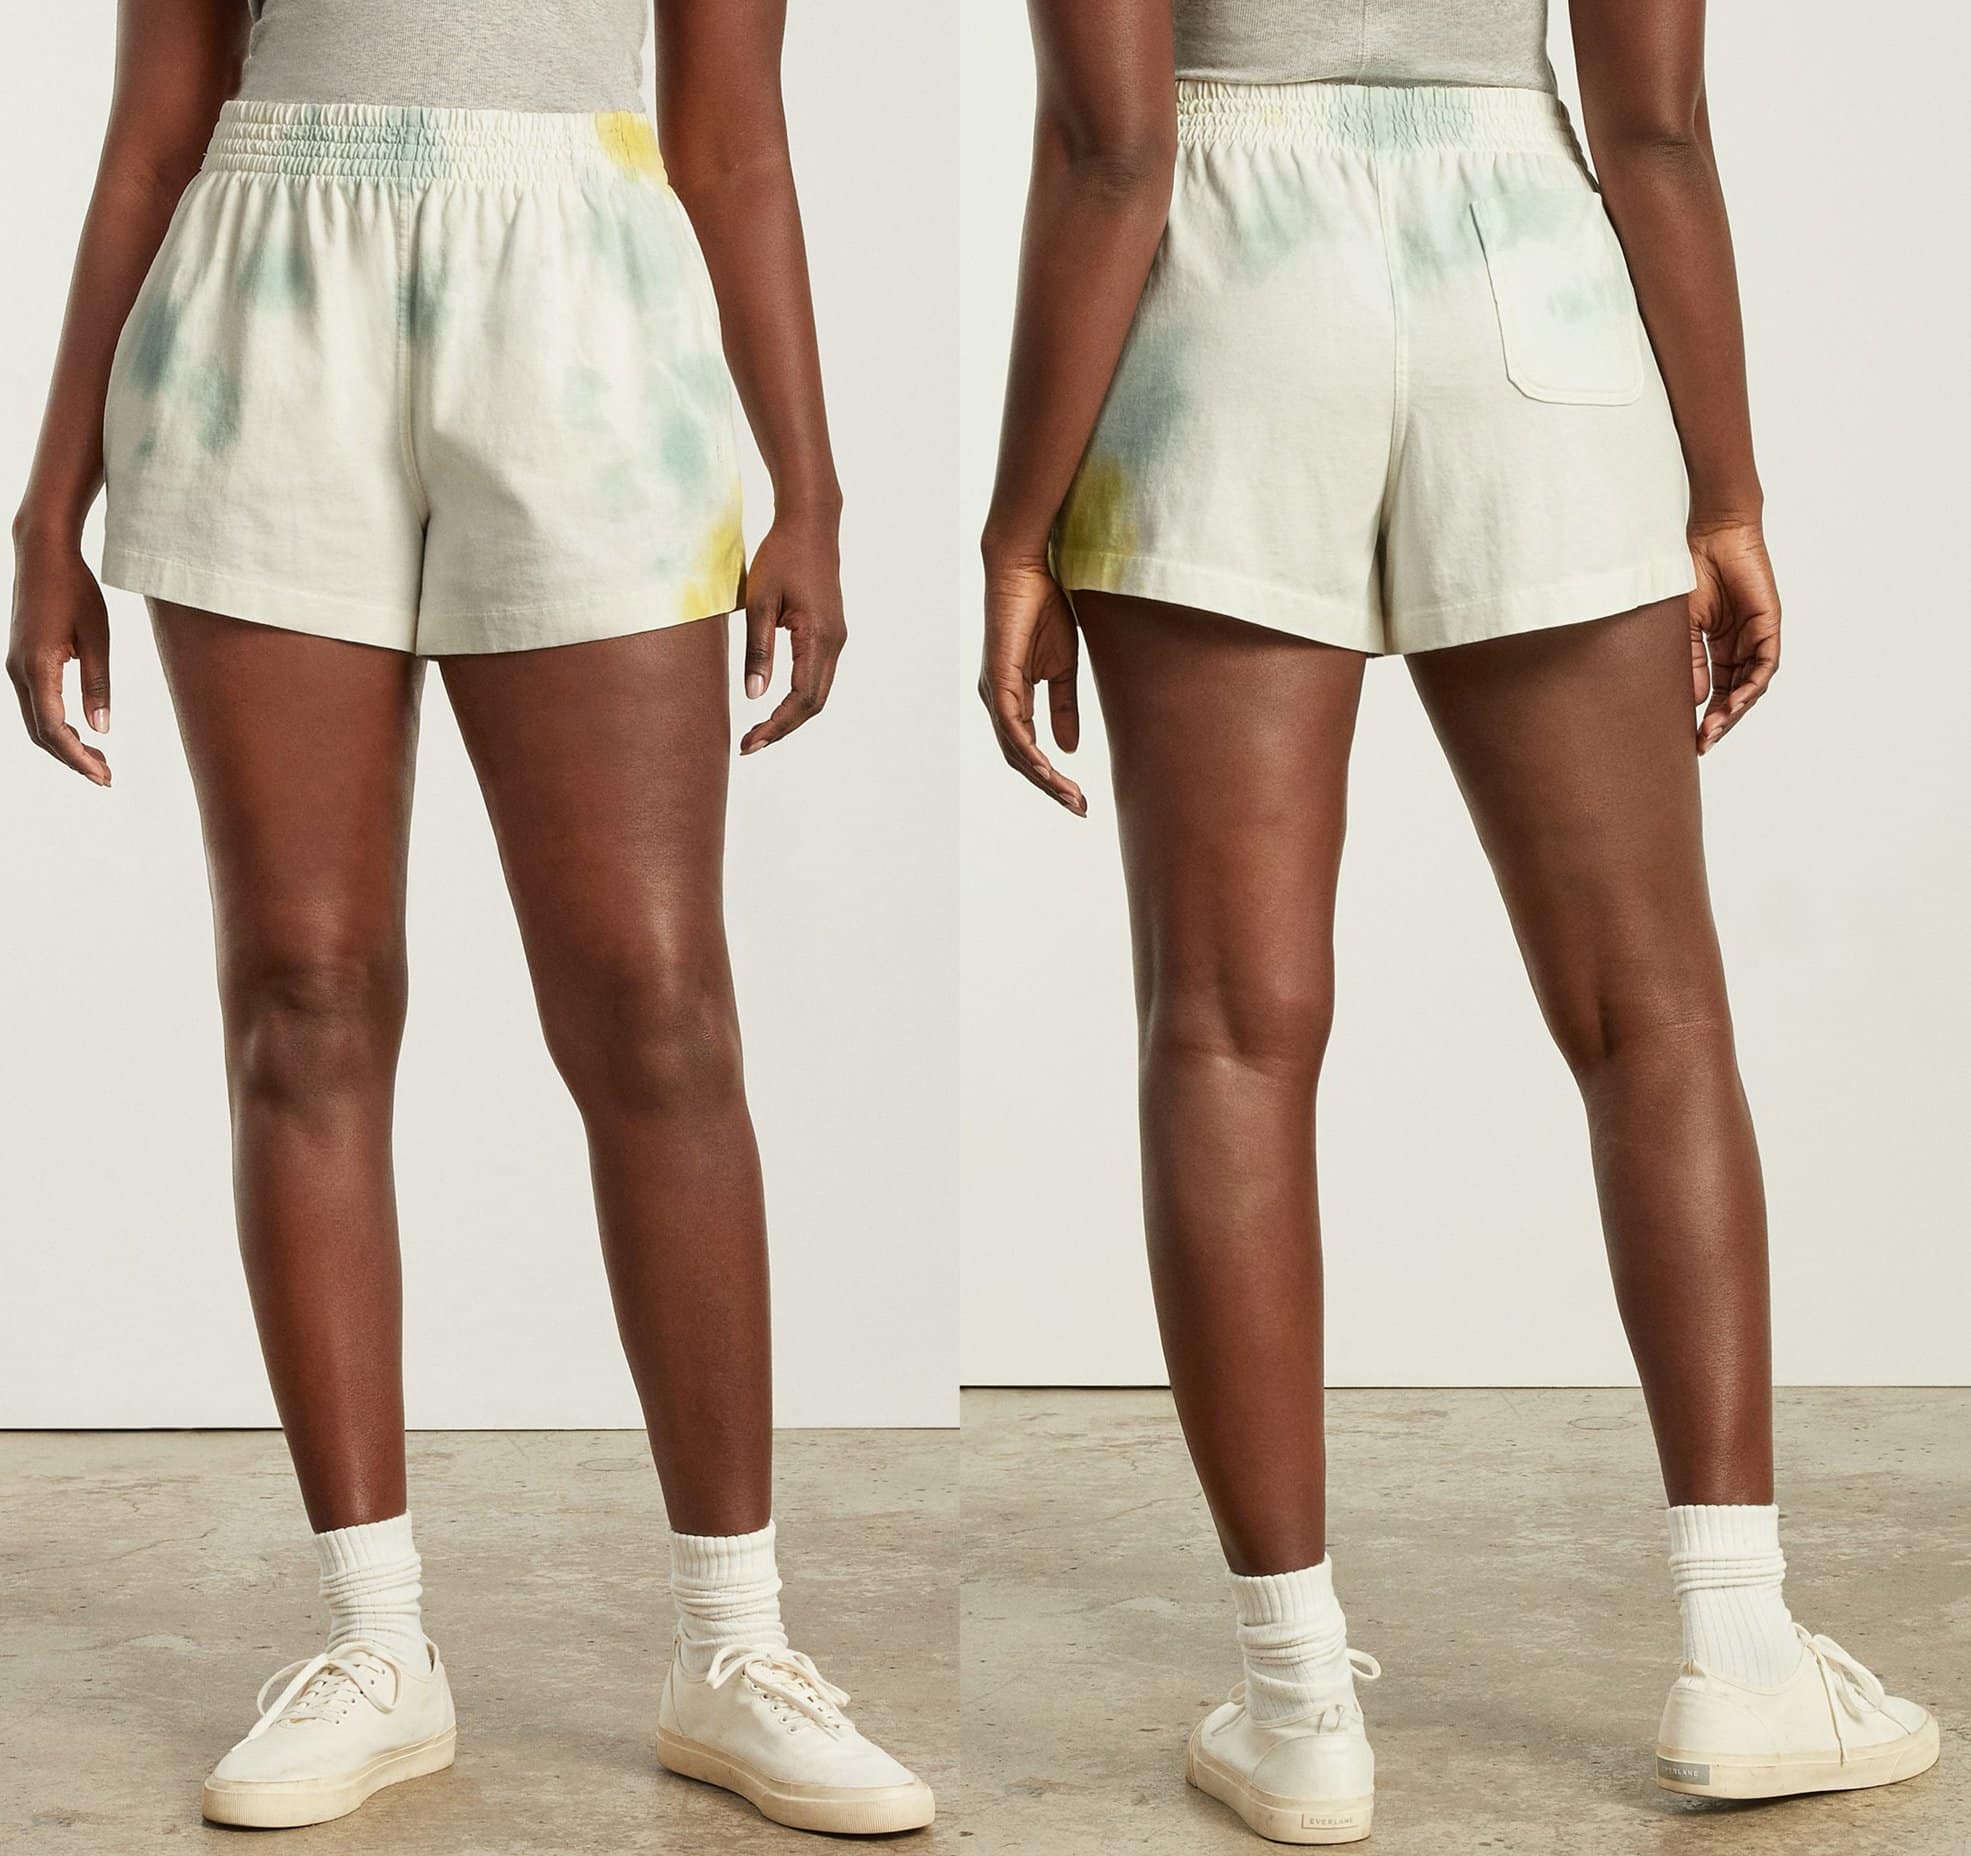 Everlane's Retro Jersey shorts are reminiscent of the '70s summer camp threads, with a relaxed fit, an elastic waist, and side and back pockets